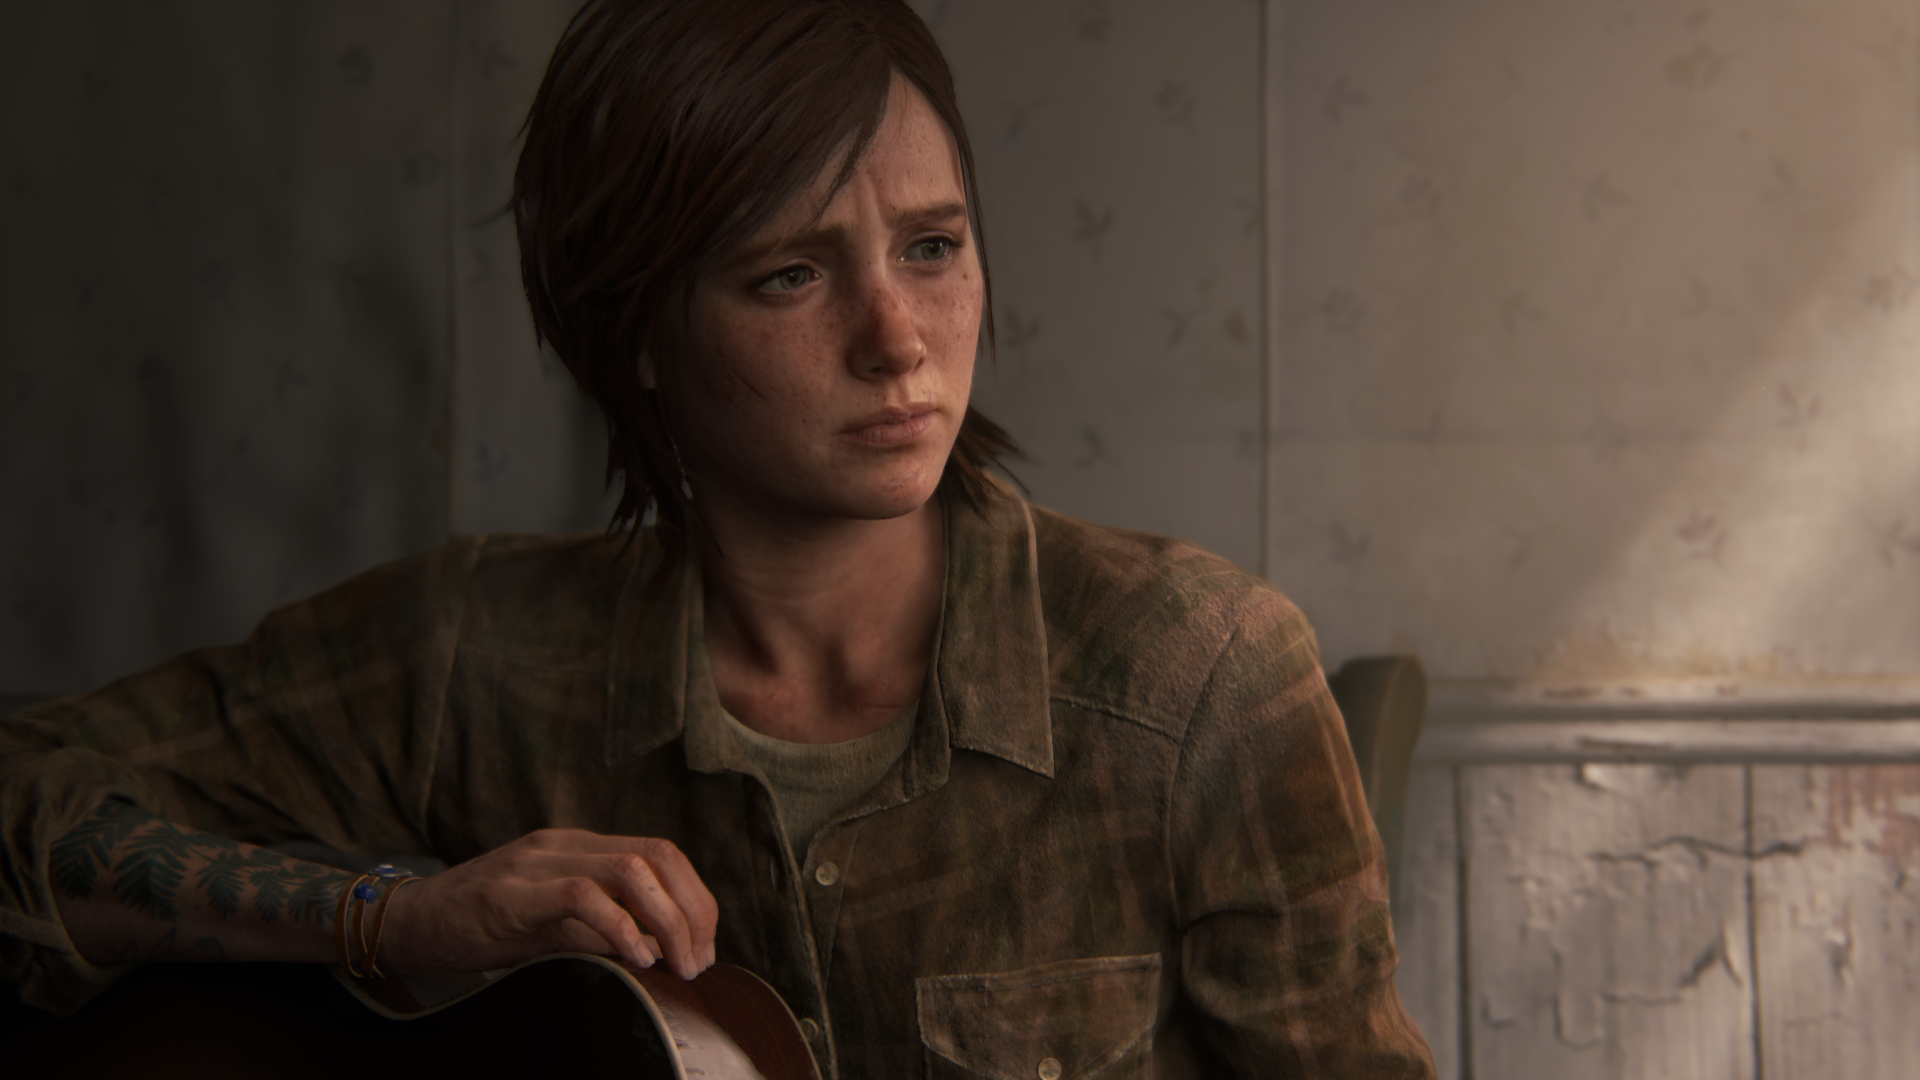 General 1920x1080 The Last of Us 2 video games screen shot Naughty Dog PlayStation 4 Ellie Williams face women video game characters